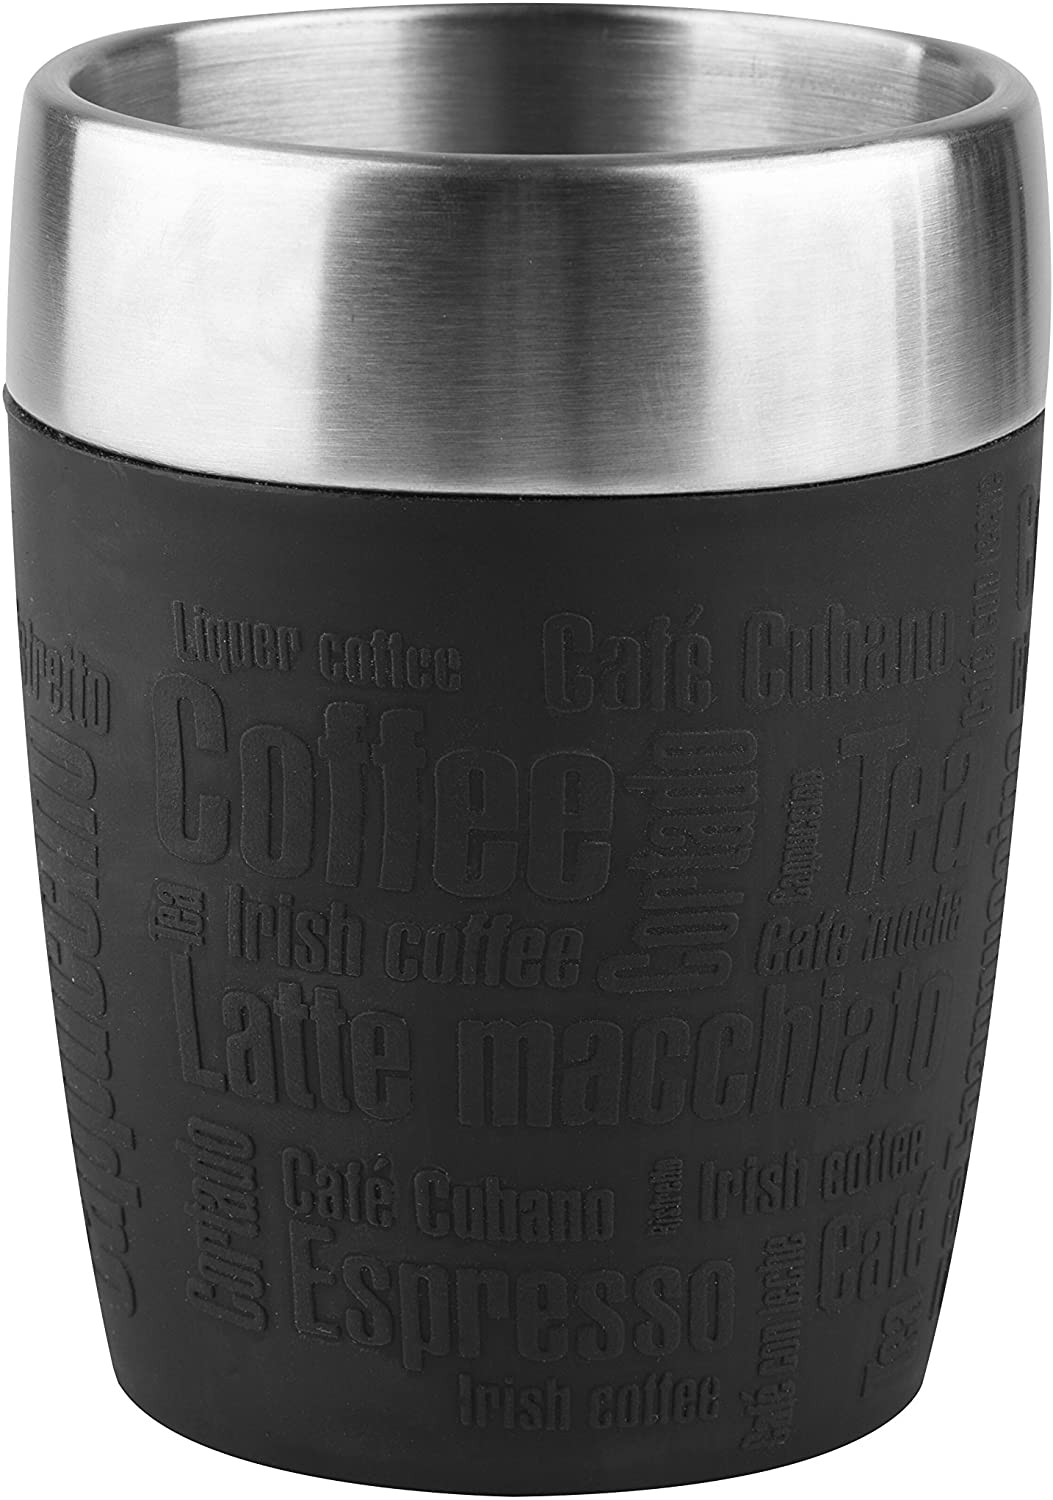 Tefal Travel cup cup, plastic, stainless steel, 1 piece (1 pack)